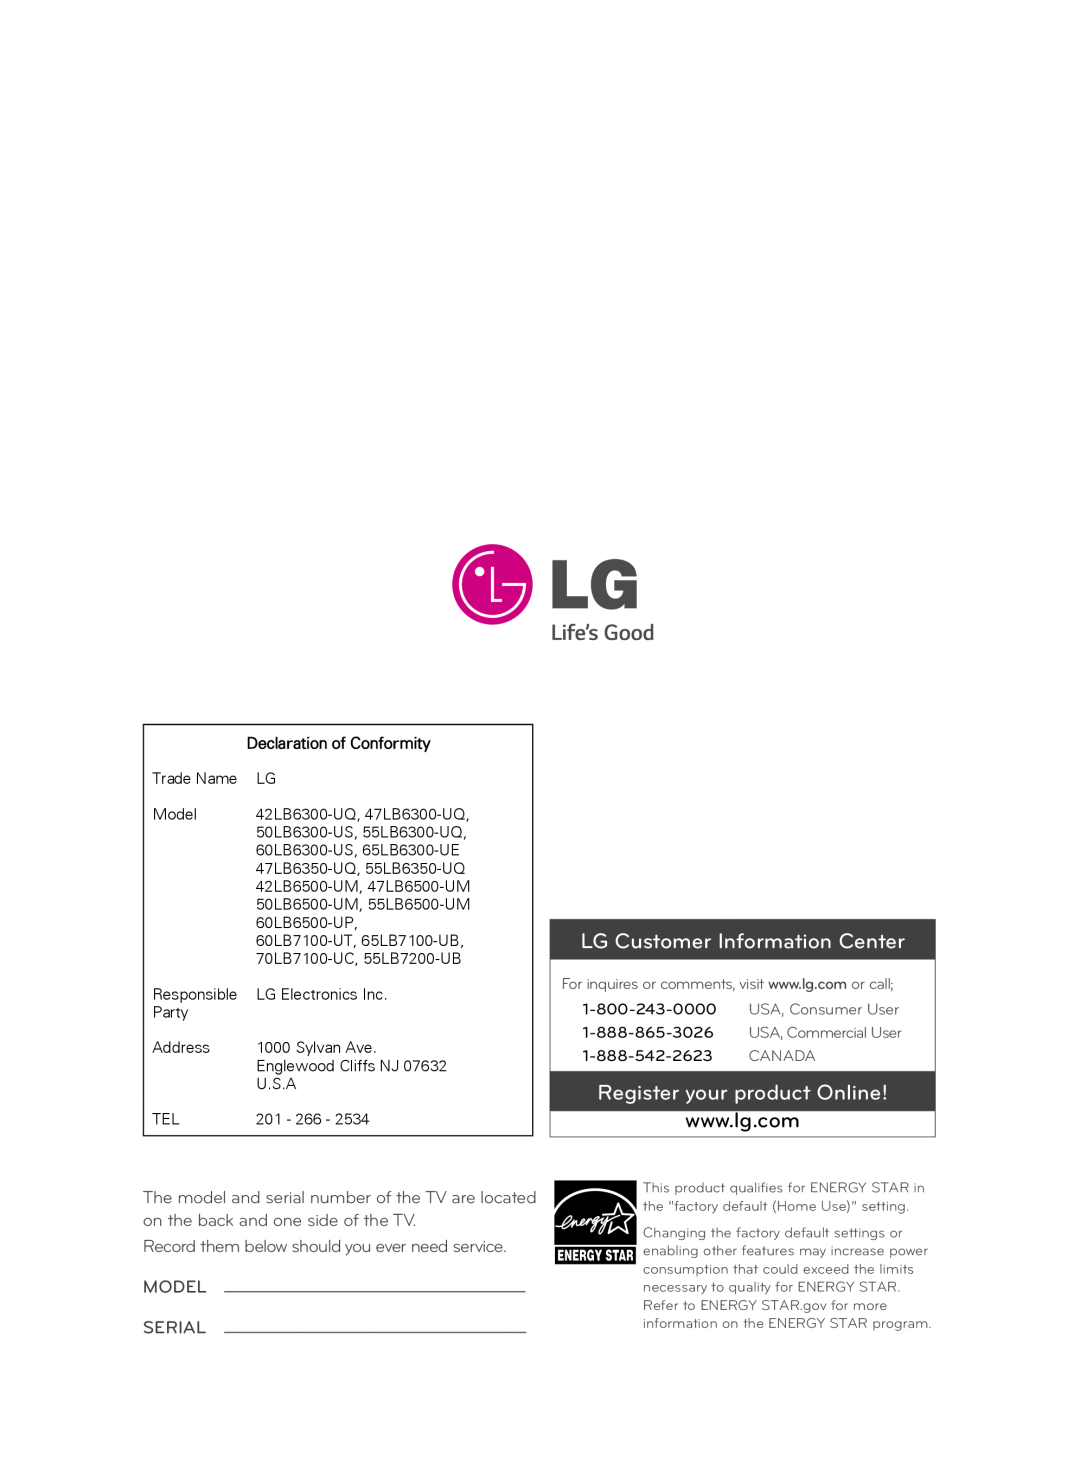 LG Electronics 50LB6300 LG Customer Information Center, Register your product Online, Declaration of Conformity, Canada 